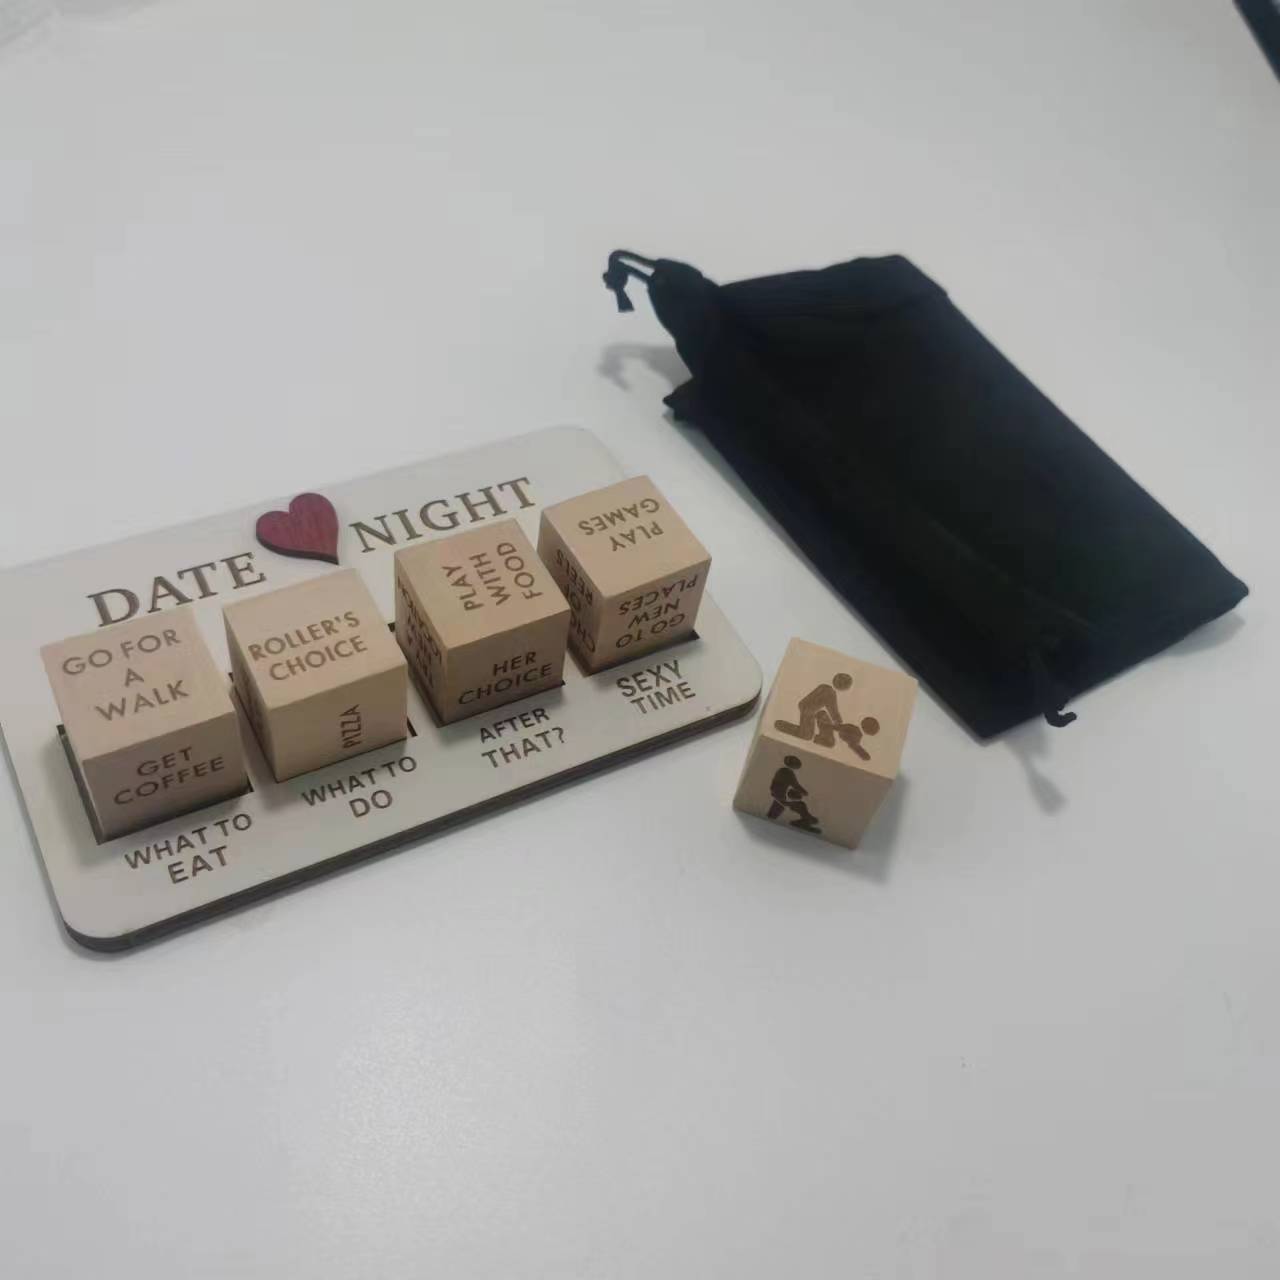 Date Night Dice, Funny Date Night Idea Dice for Couples, Portable Wooden Dice Kit for Wife Husband Girlfriend Boyfriend Couples Games Valentine's Day Wedding Anniversaries Birthdays Gifts